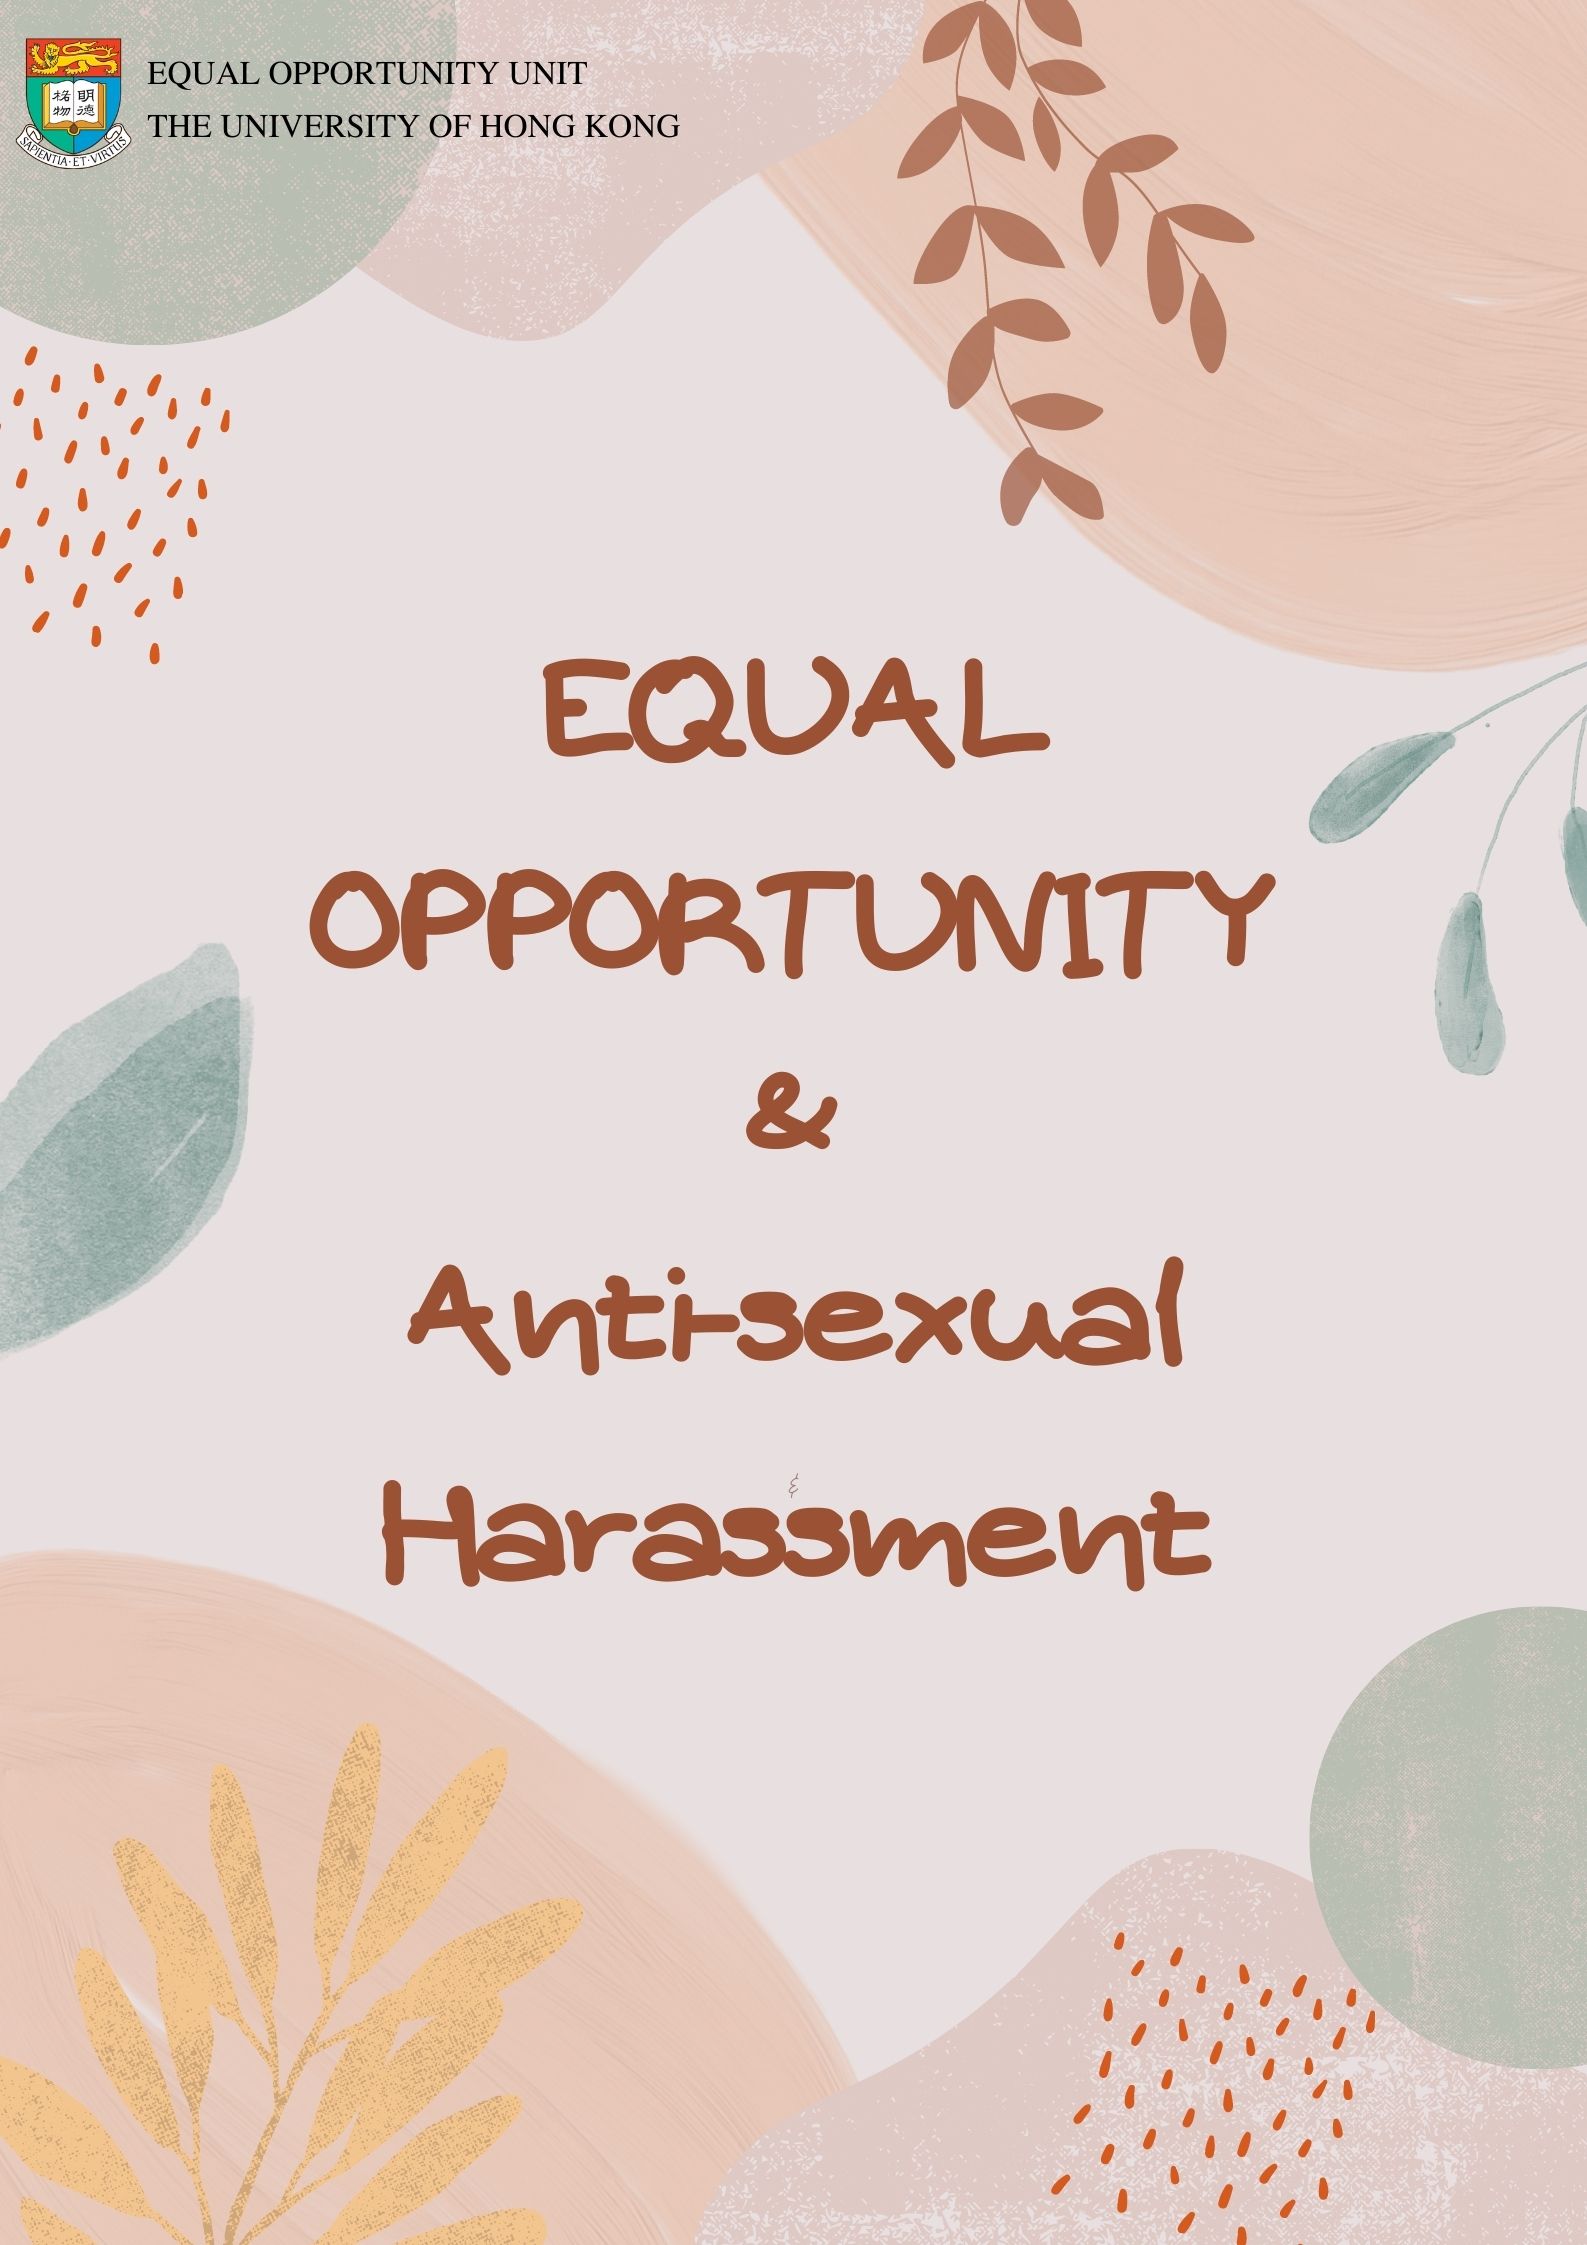 The poster of Equal Opportunity and Anti-sexual Harassment